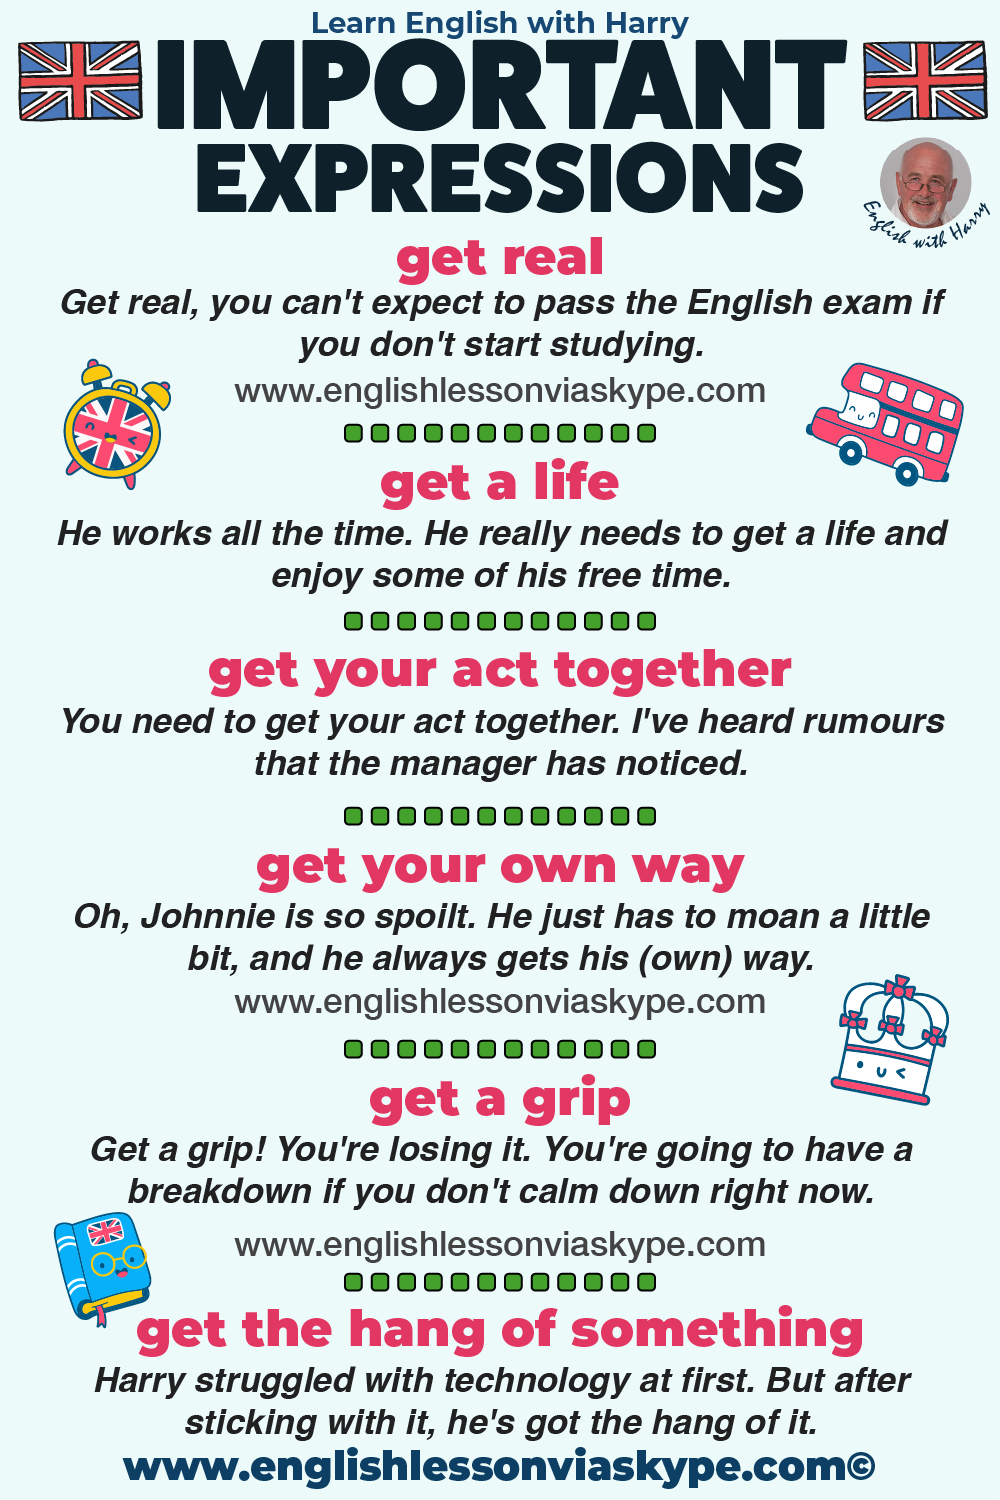 10 Crucial idioms with get. English speaking skills. Improve English speaking skills. Upgrade your vocabulary. English grammar rules. Improve English speaking. Advanced English lessons on Zoom and Skype. Improve English speaking and writing skills. #learnenglish